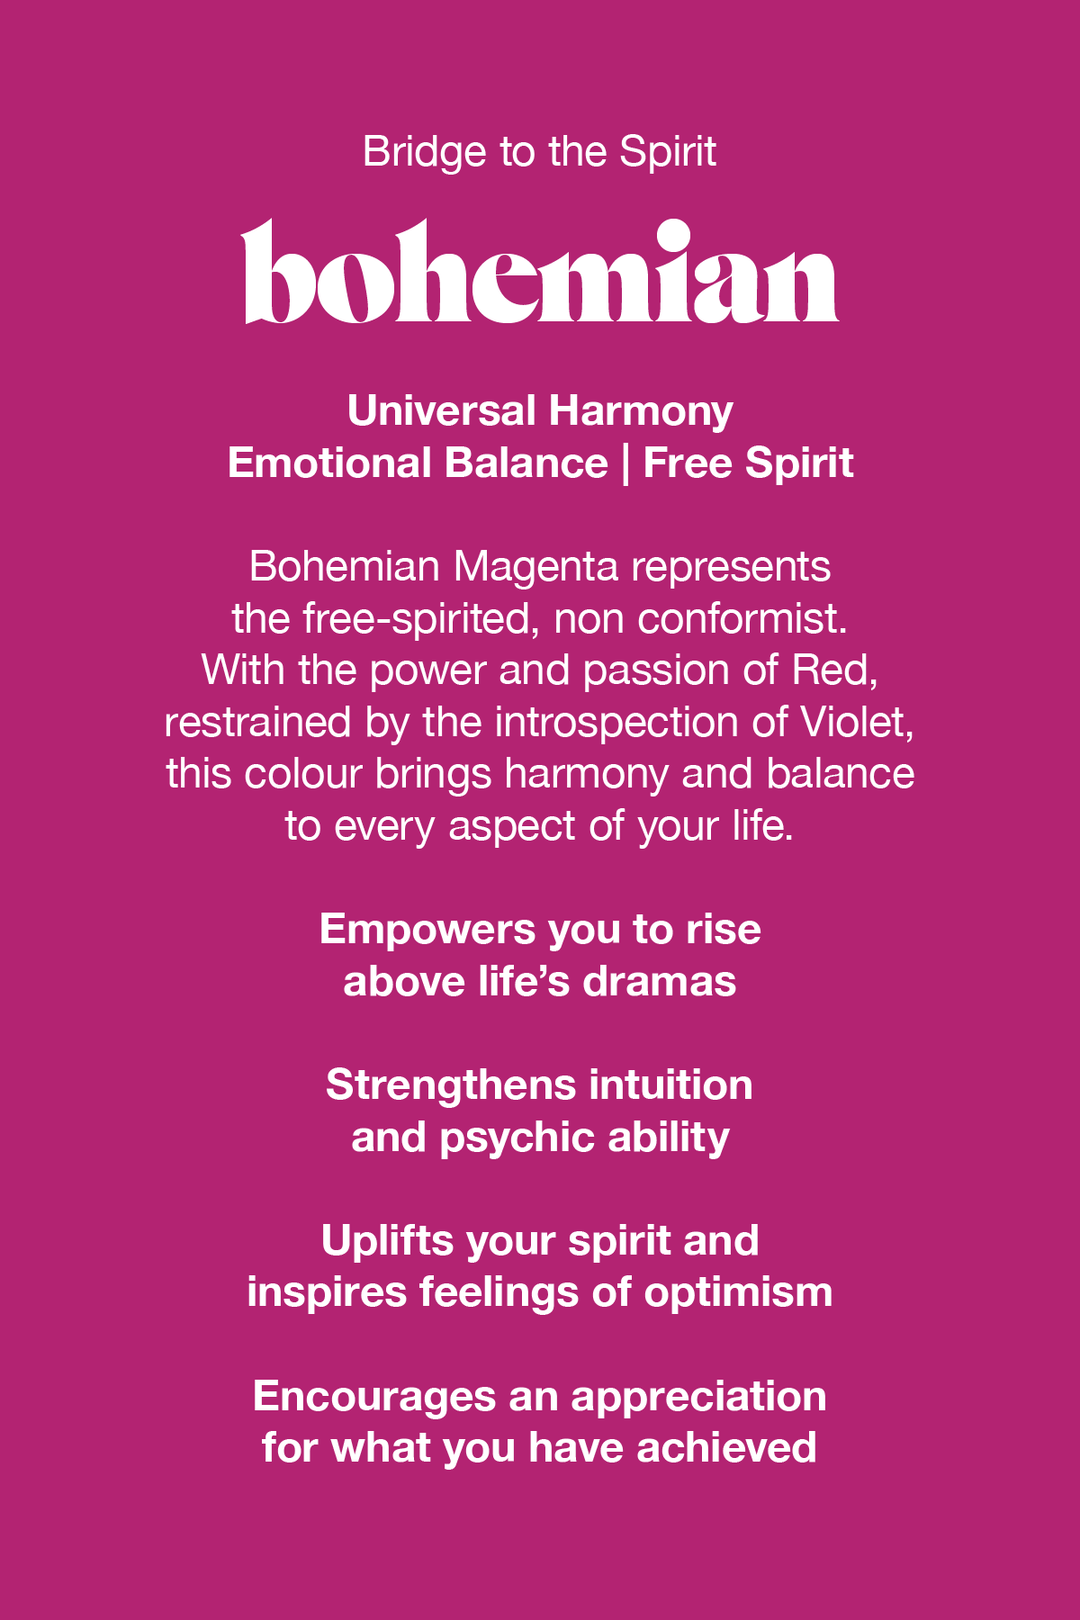 Bohemian Magenta represents the free-spirited non conformist. With the power and passion of red, balanced by the introspection of violet, this colour brings harmony and balance to every aspect of your life.